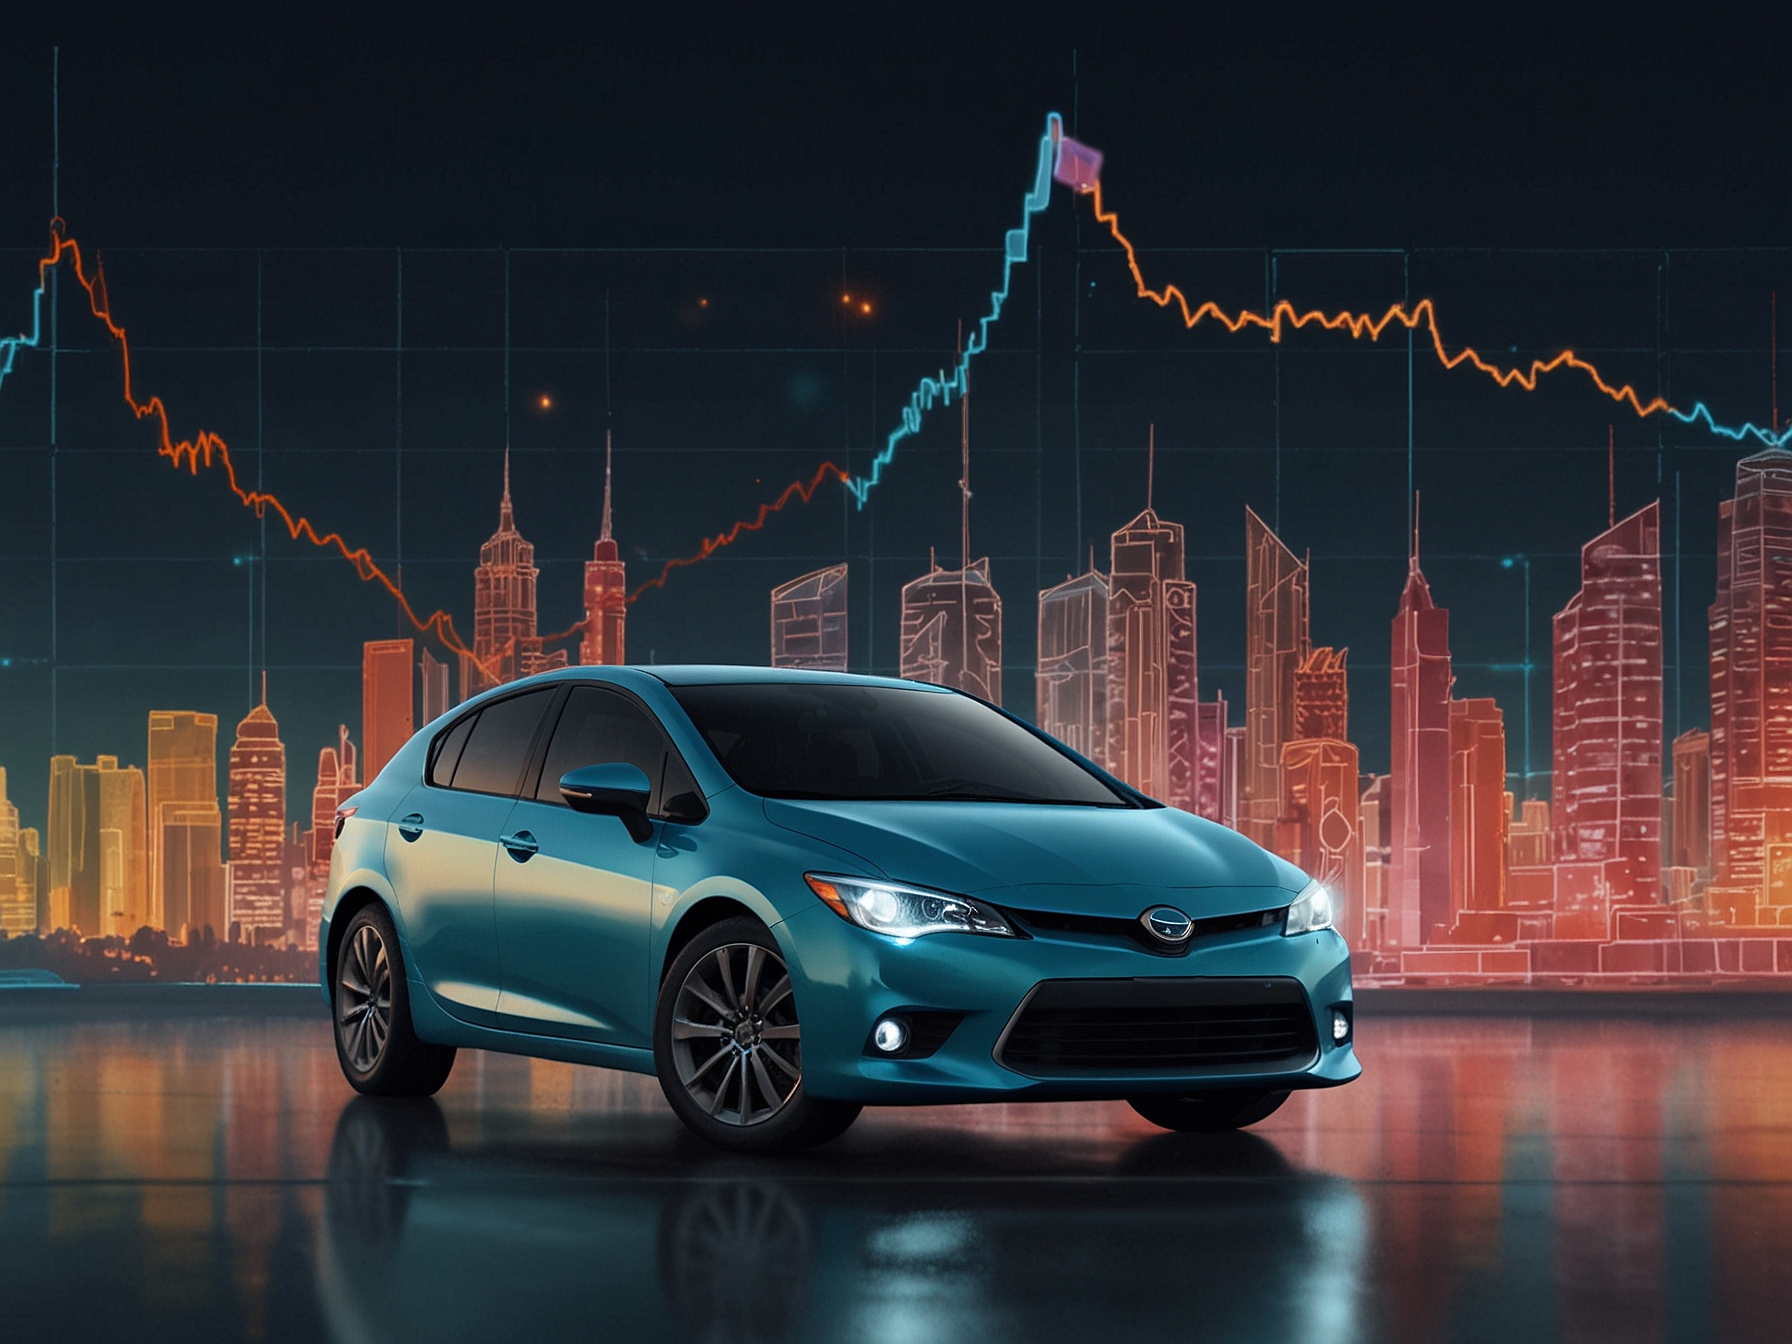 A graph showcasing the recent surge in Carvana's options activity with a clear distinction between call options and put options, highlighting the bullish trend among investors.